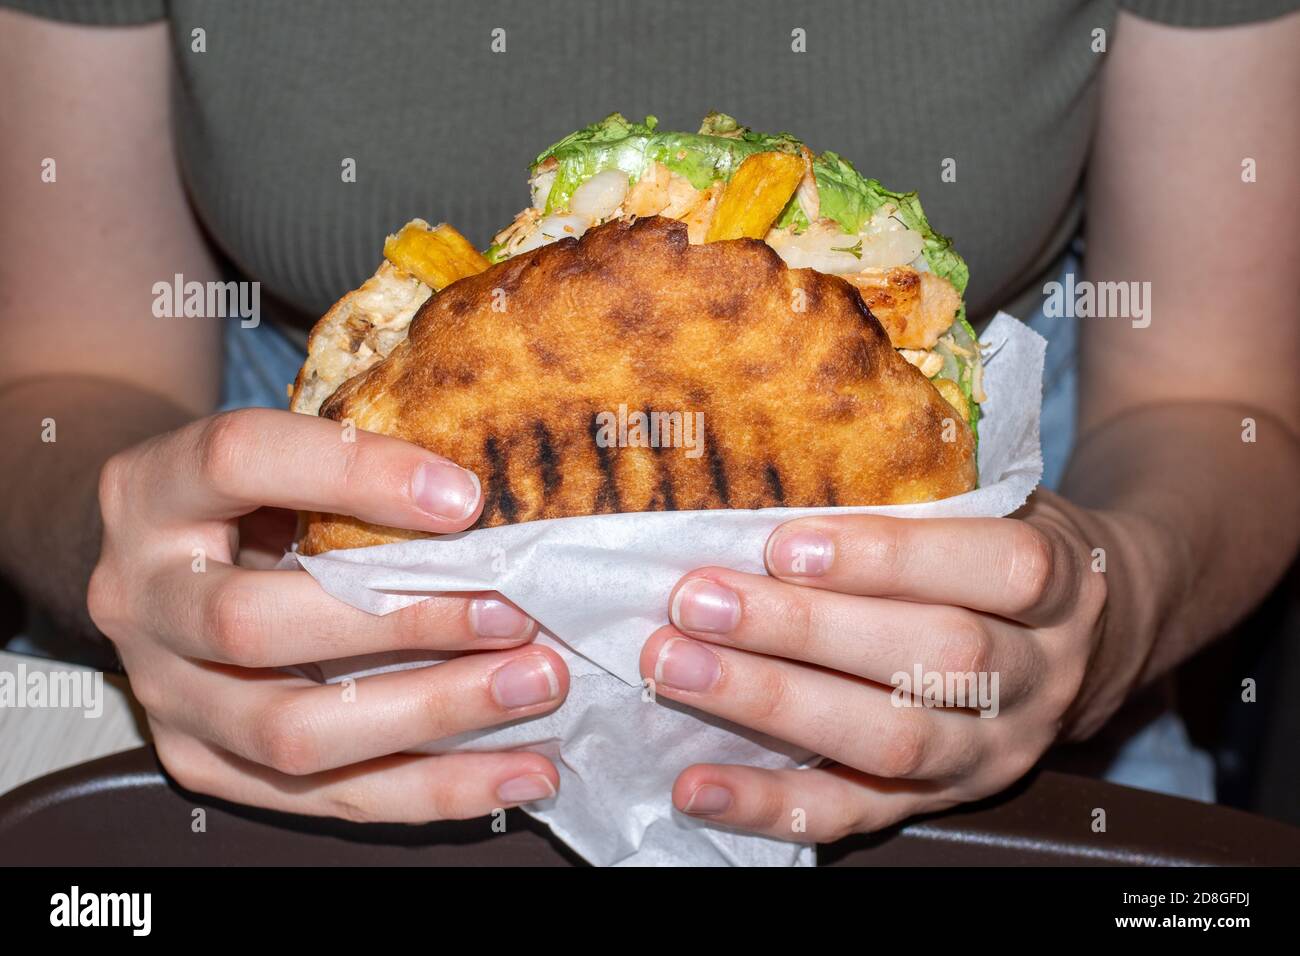 Close-up of female hands holding a large hamburger, front view. Unhealthy food concept. Overweight concept Stock Photo